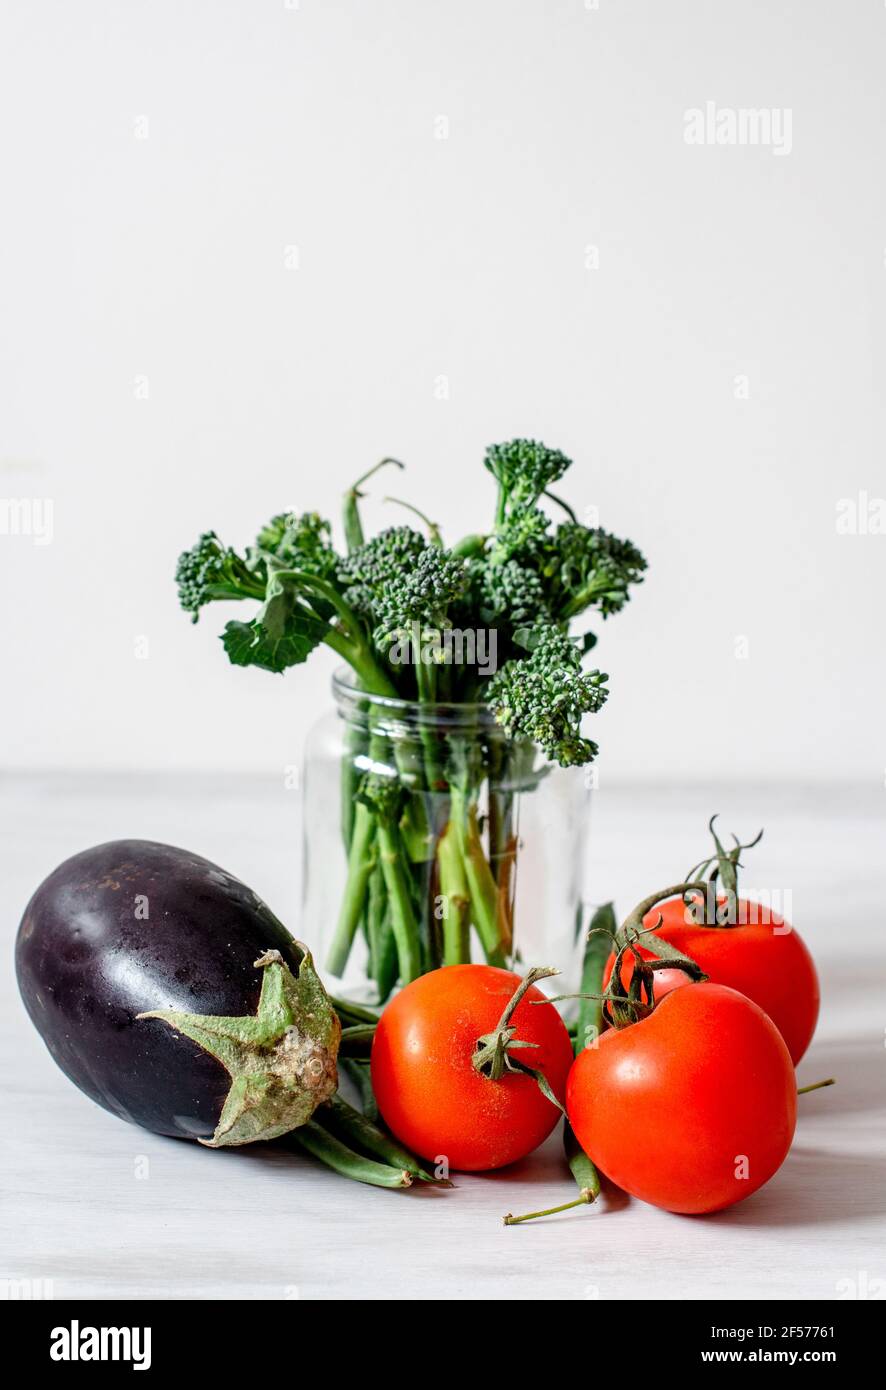 Organic Vegetables - Aubergine, Egg plant, Tomatoes, broccoli with a brown paper bag Stock Photo